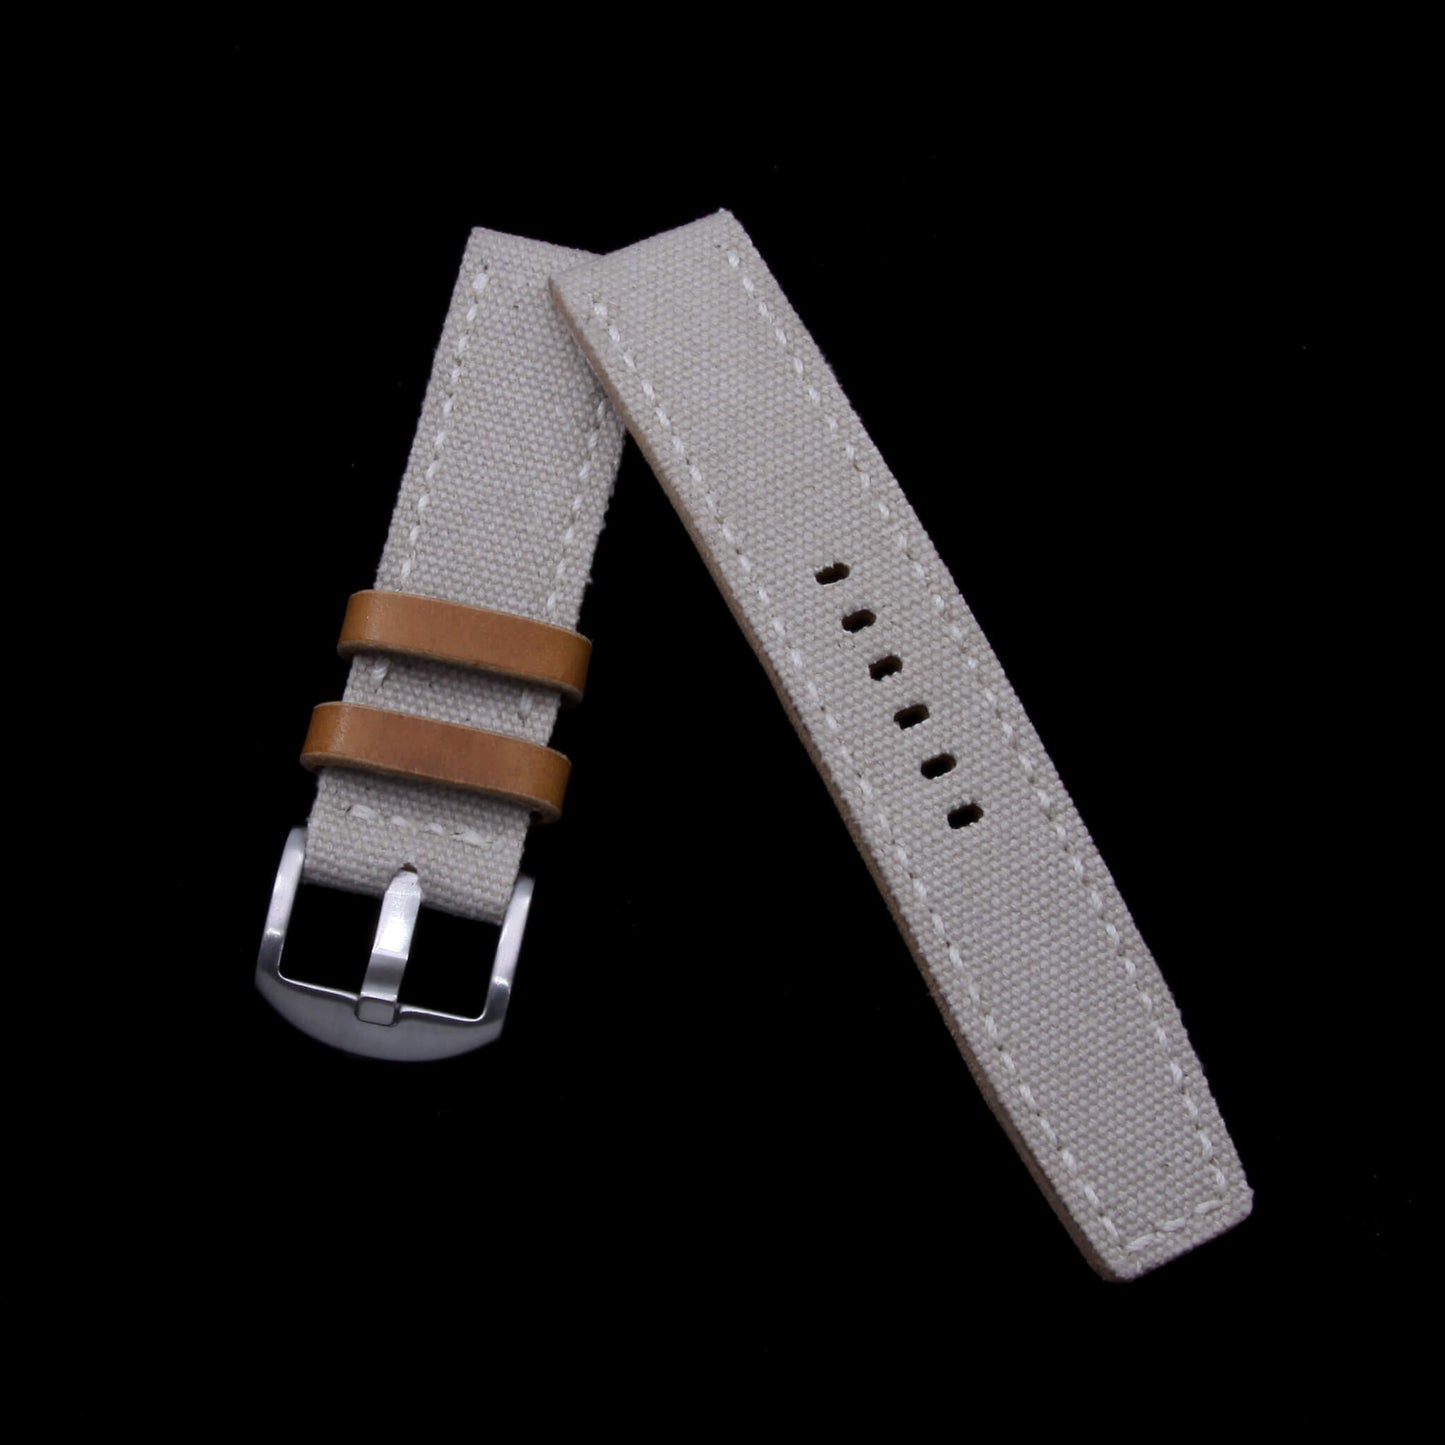 2-Piece Full Stitch Leather Watch Strap, made with Beige Canvas and Italian veg-tanned leather lining, handcrafted by Cozy Handmade